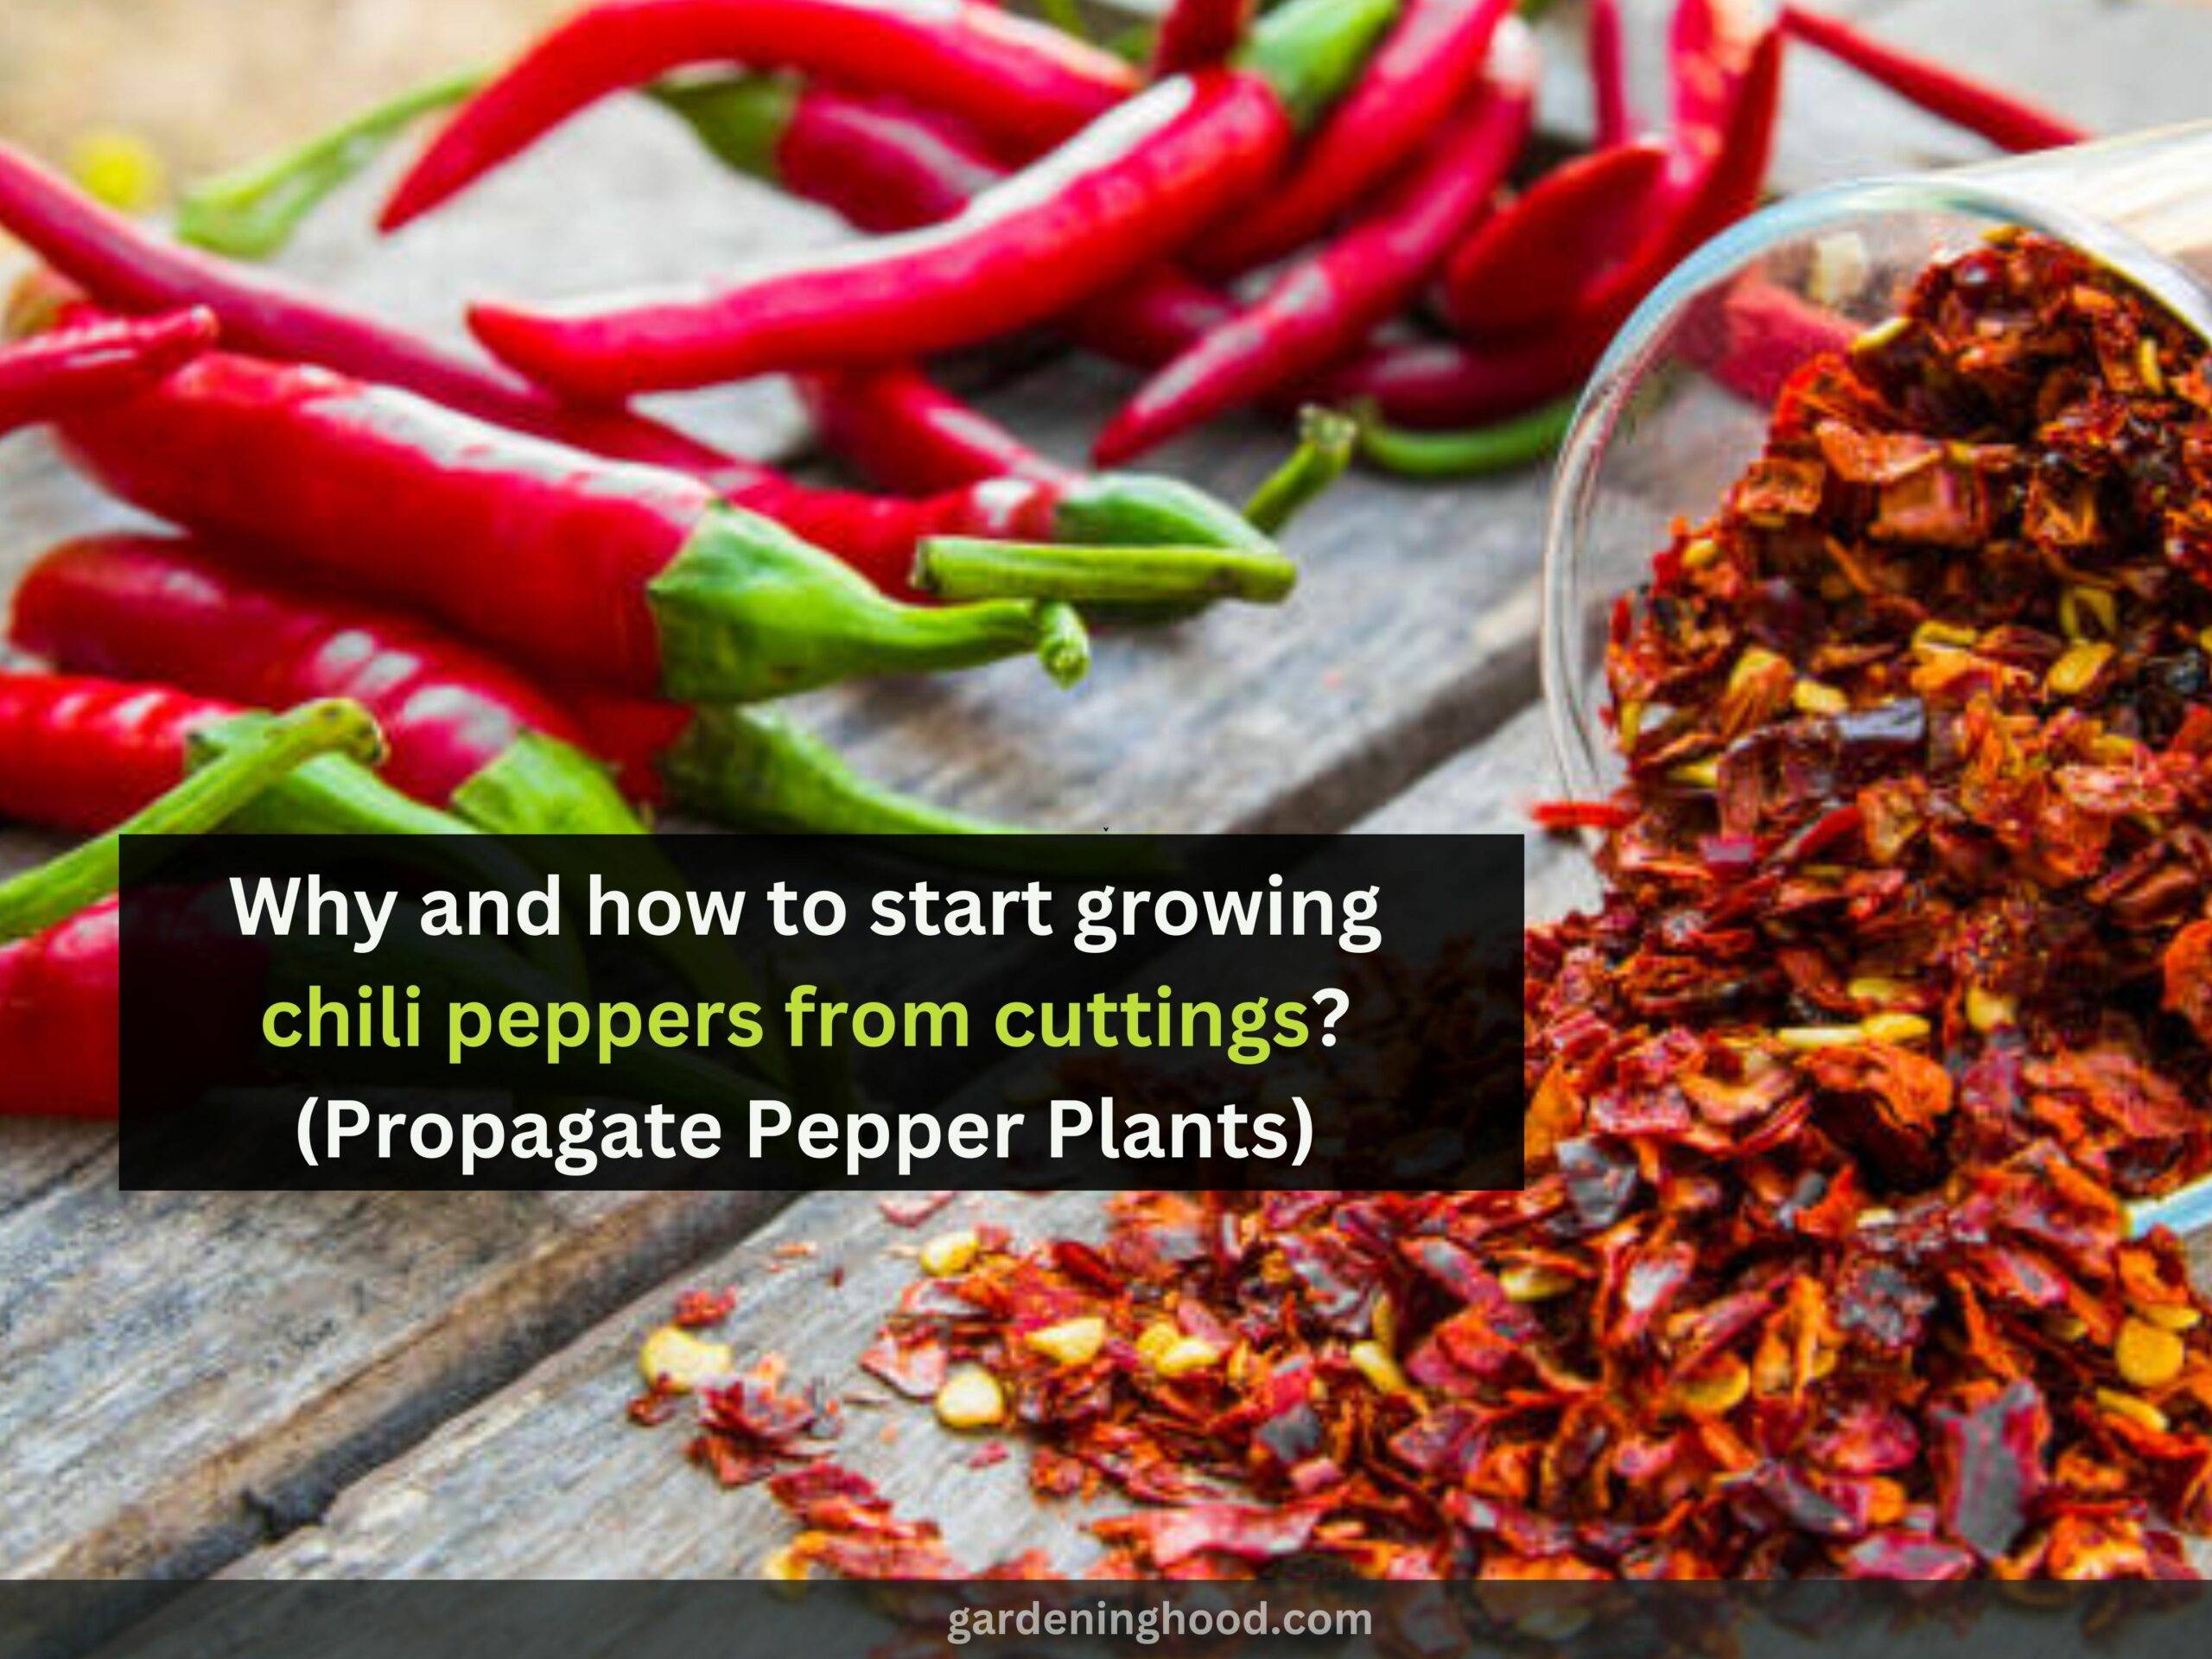 Why and how to start growing chili peppers from cuttings? (Propagate Pepper Plants)